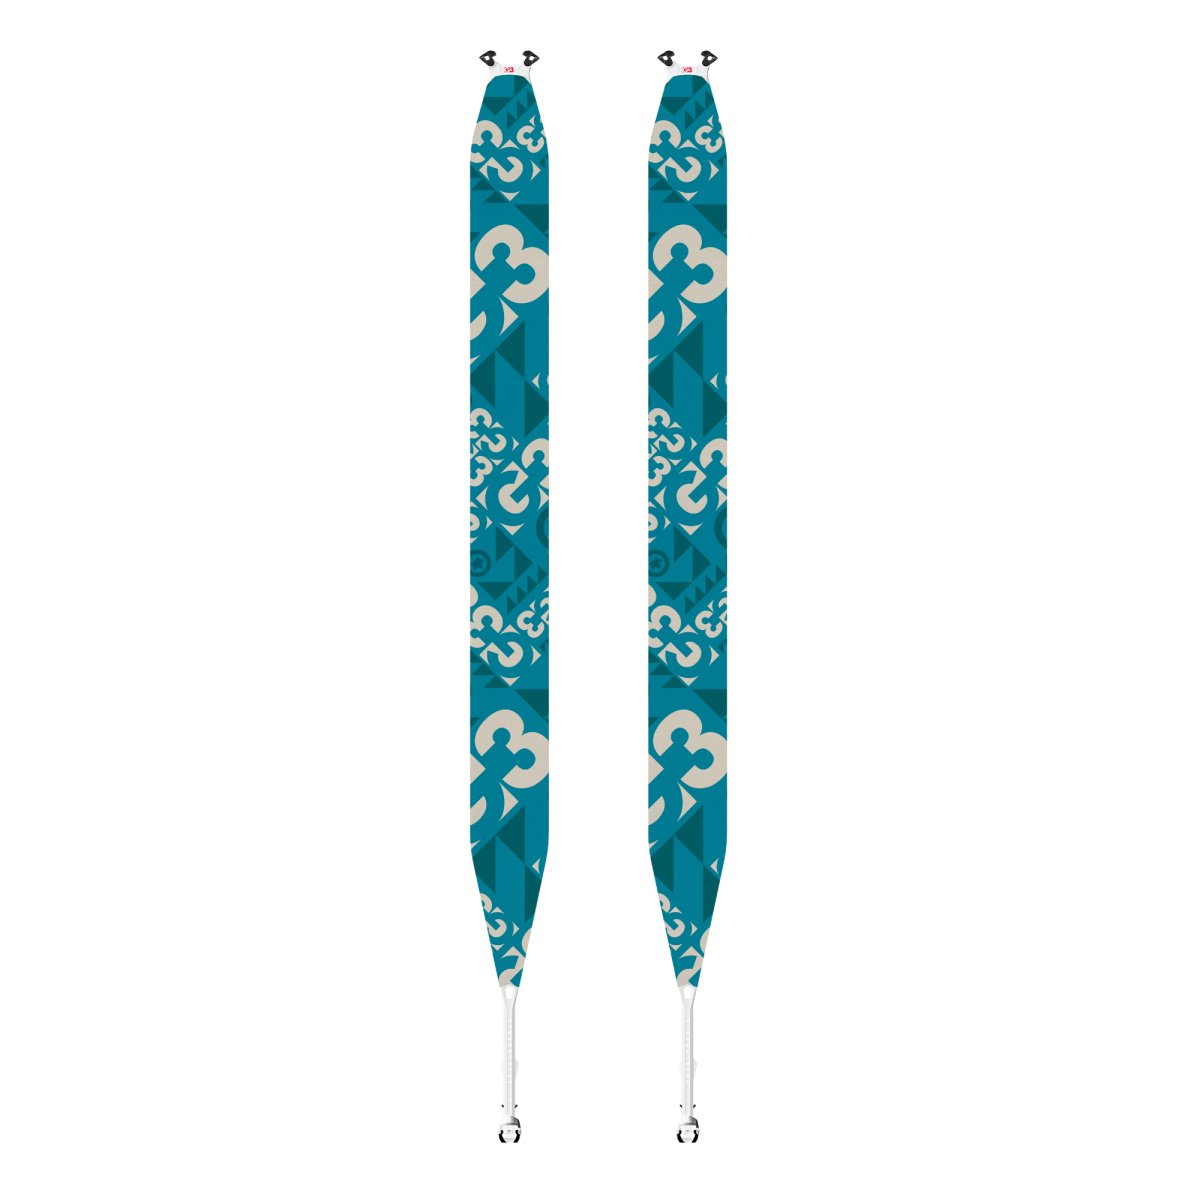 ELEMENTS GLIDE Climbing Skins (Factory Seconds) - Skins - G3 Store Canada